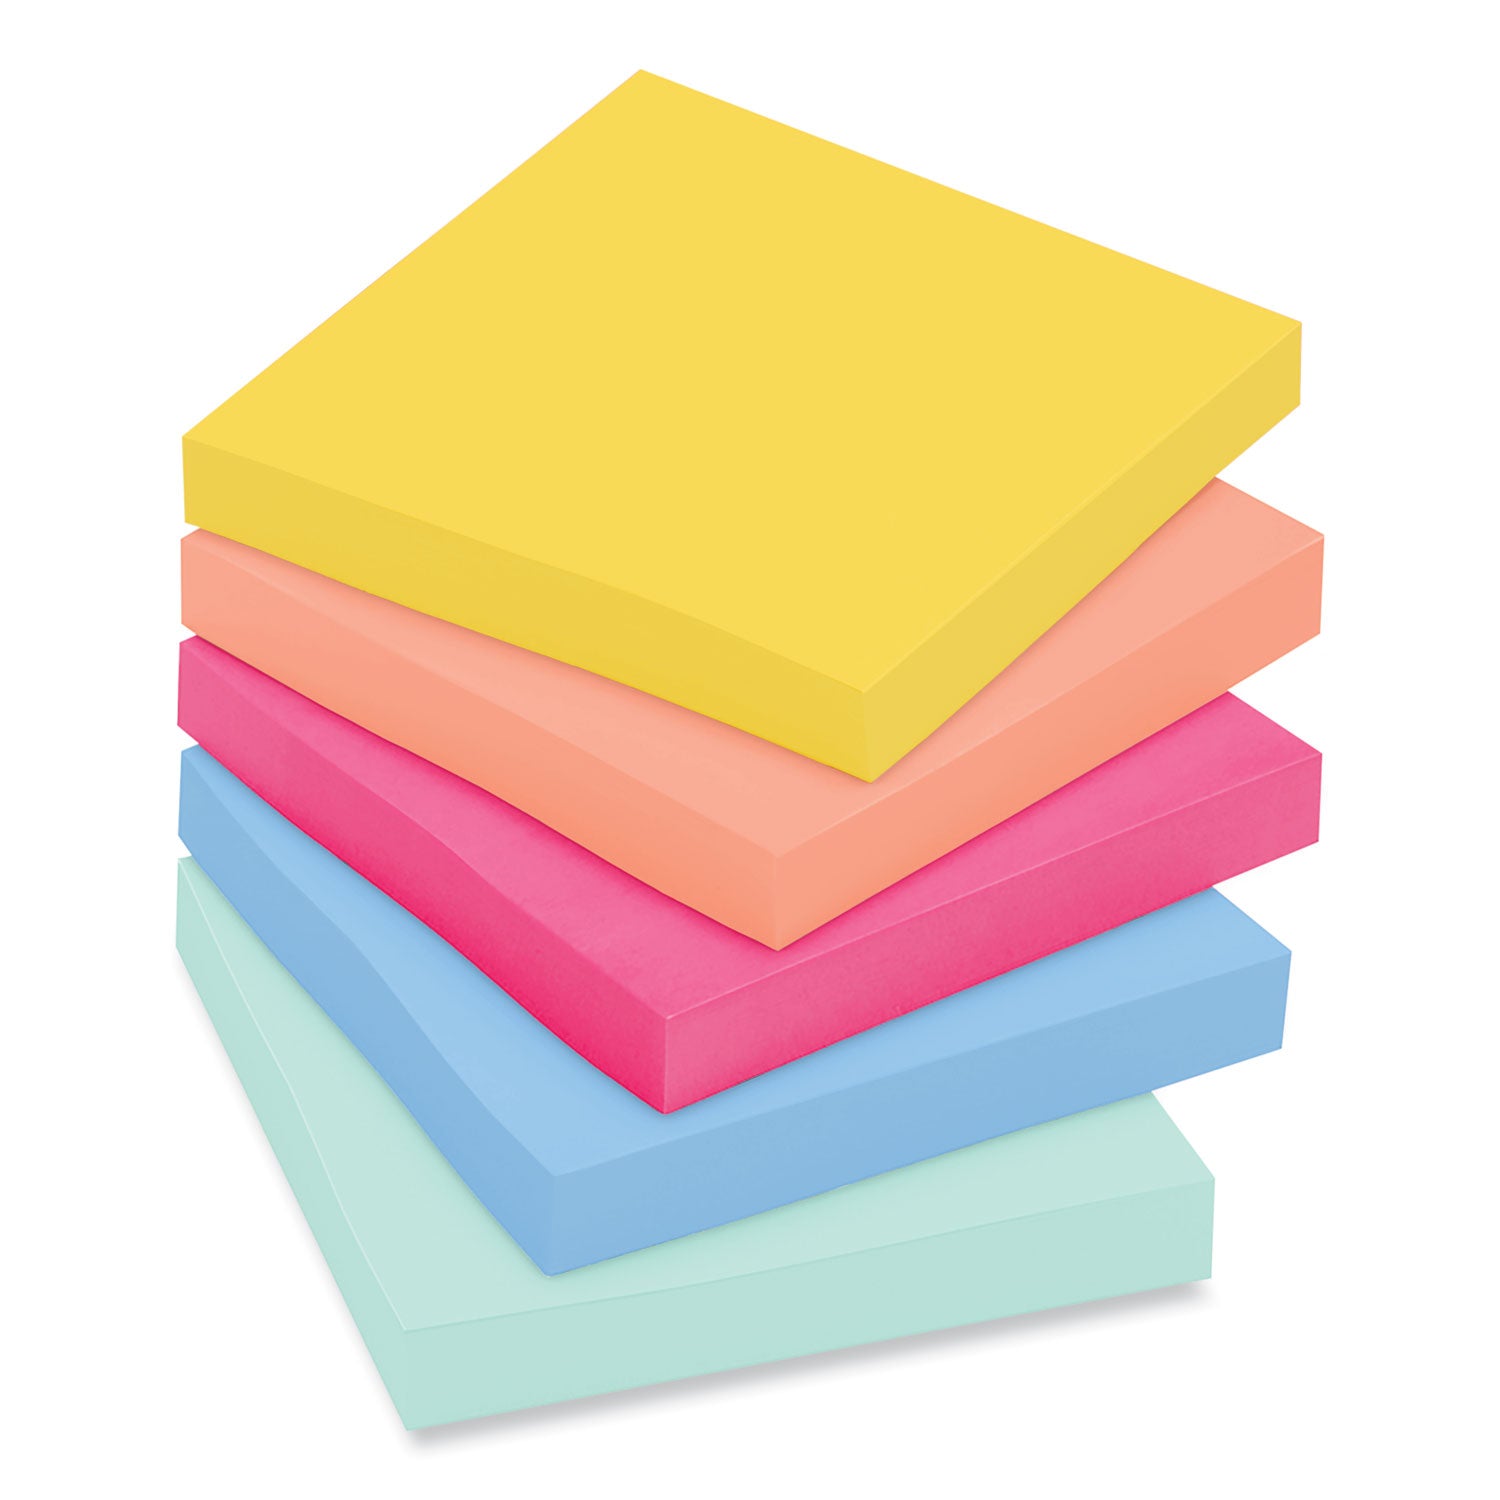 note-pads-in-summer-joy-collection-colors-3-x-3-summer-joy-collection-colors-70-sheets-pad-24-pads-pack_mmm65424ssjoycp - 3